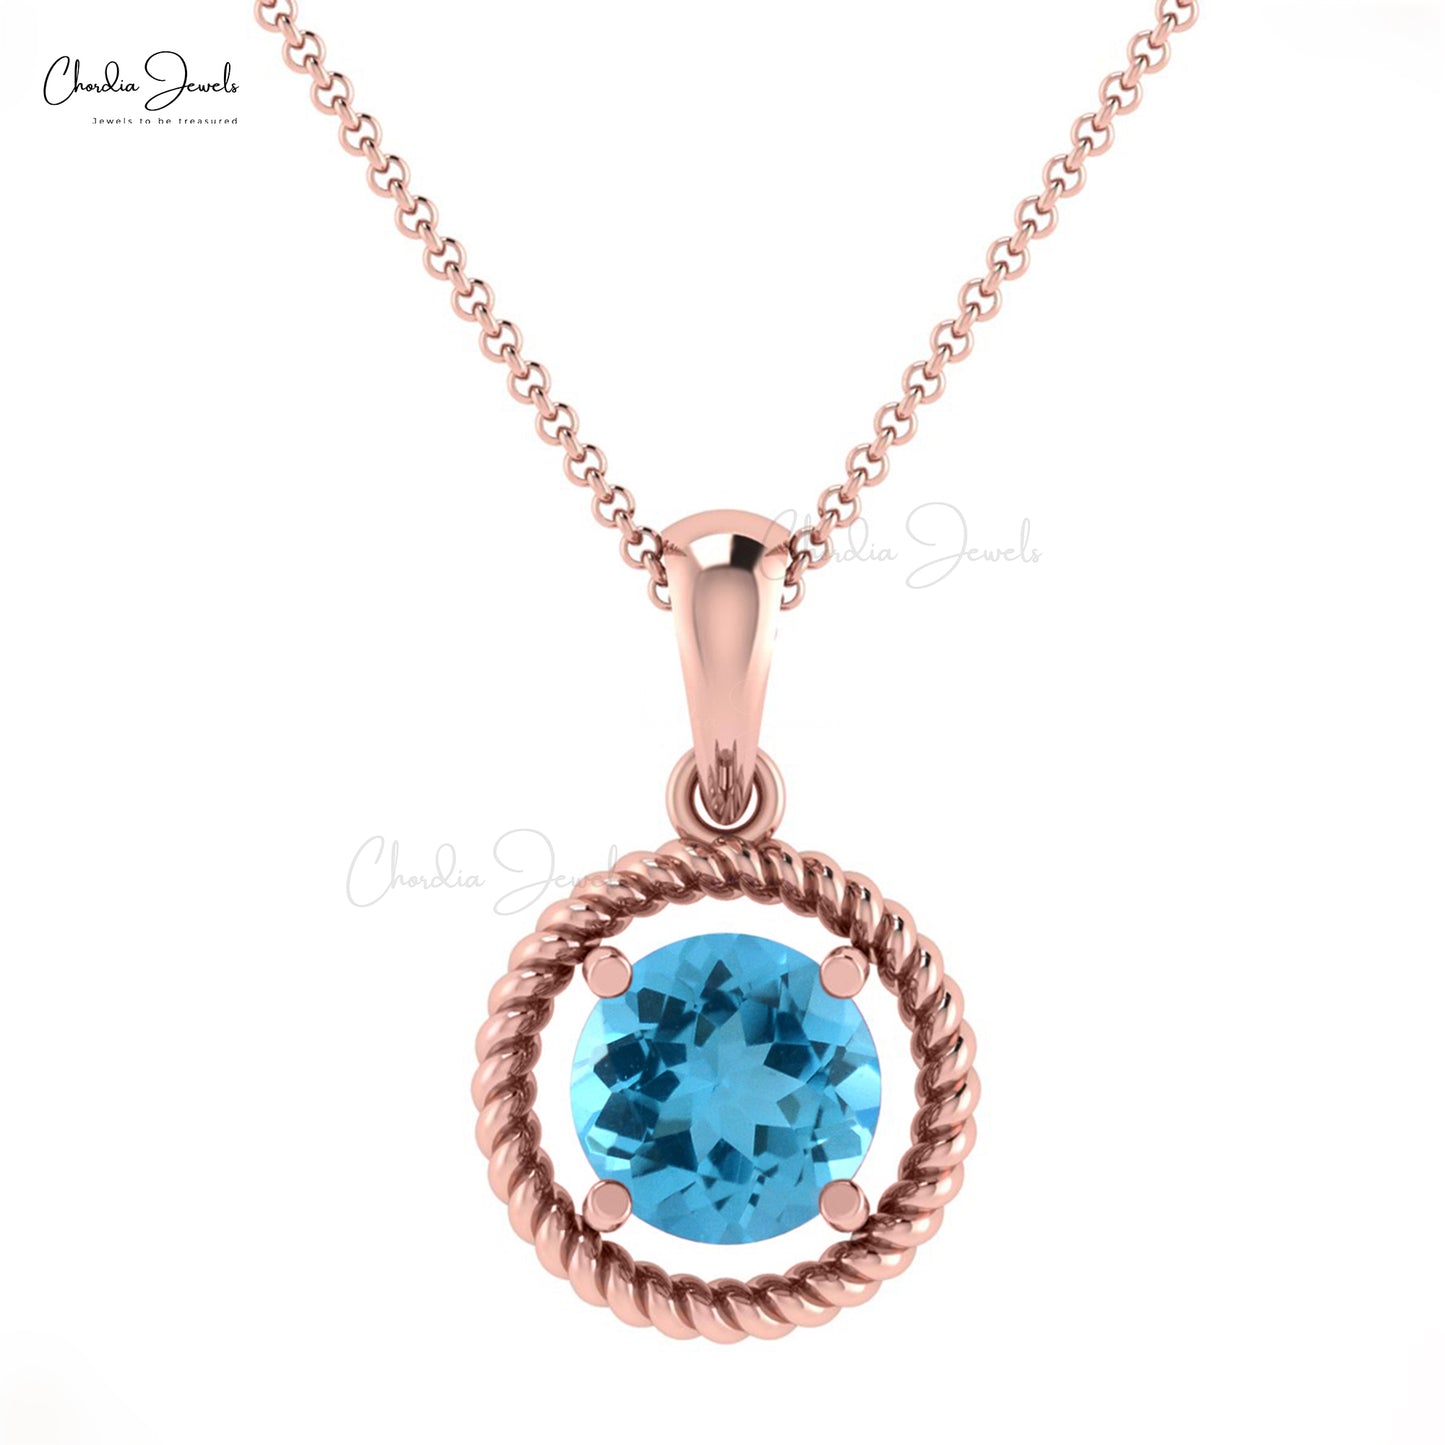 Genuine Swiss Blue Topaz Spiral Pendant 14K Hallmarked Gold Handcrafted Jewelry For Gift